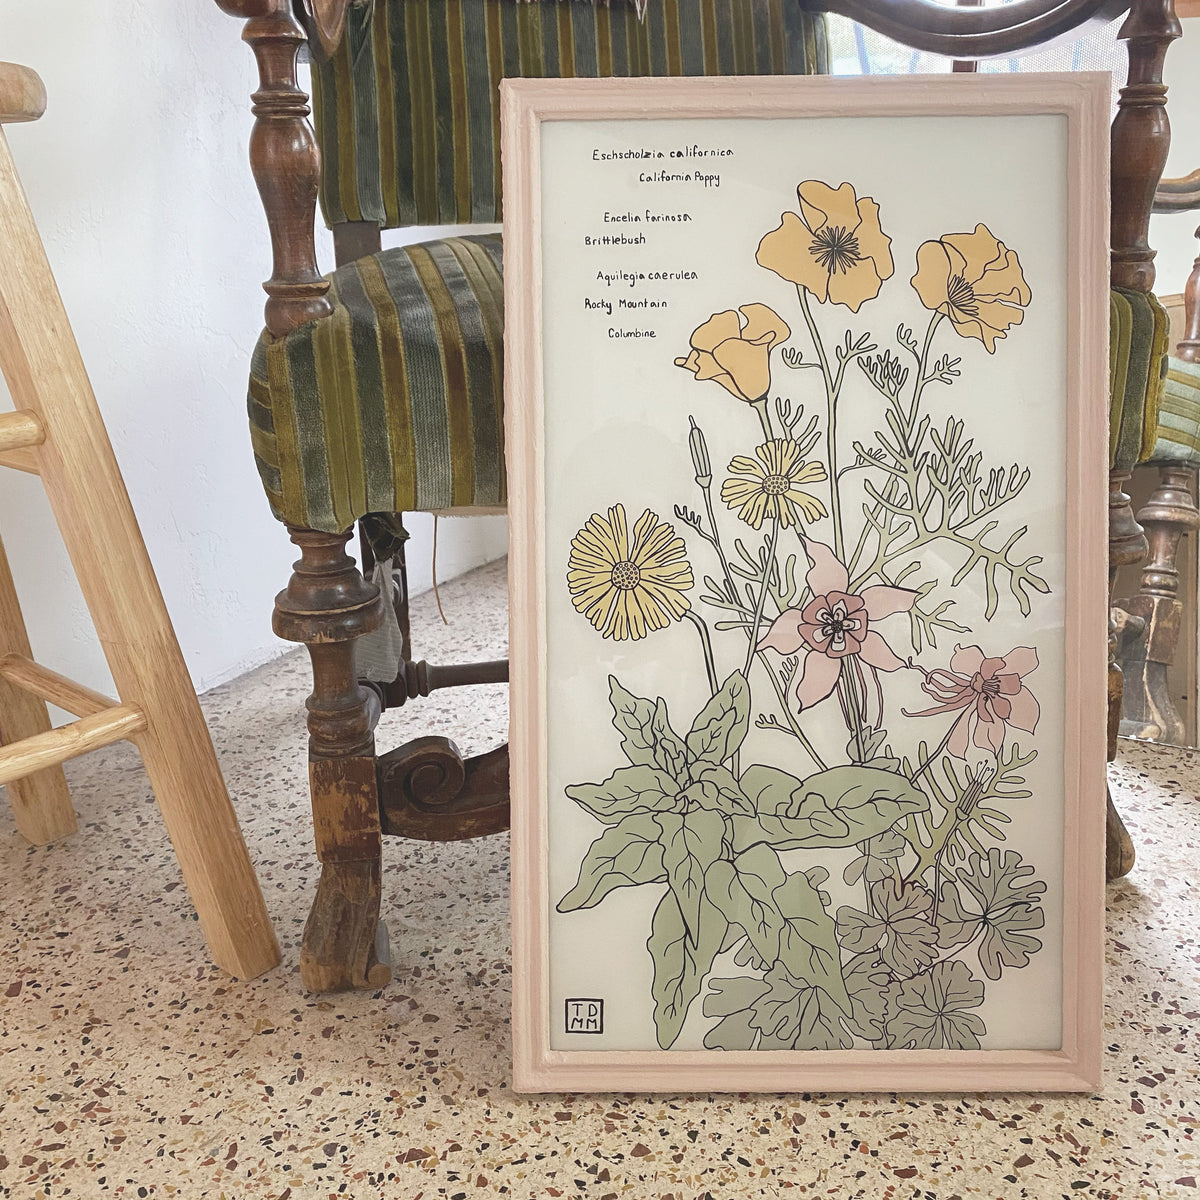 Framed painting of desert plants propped against antique chair